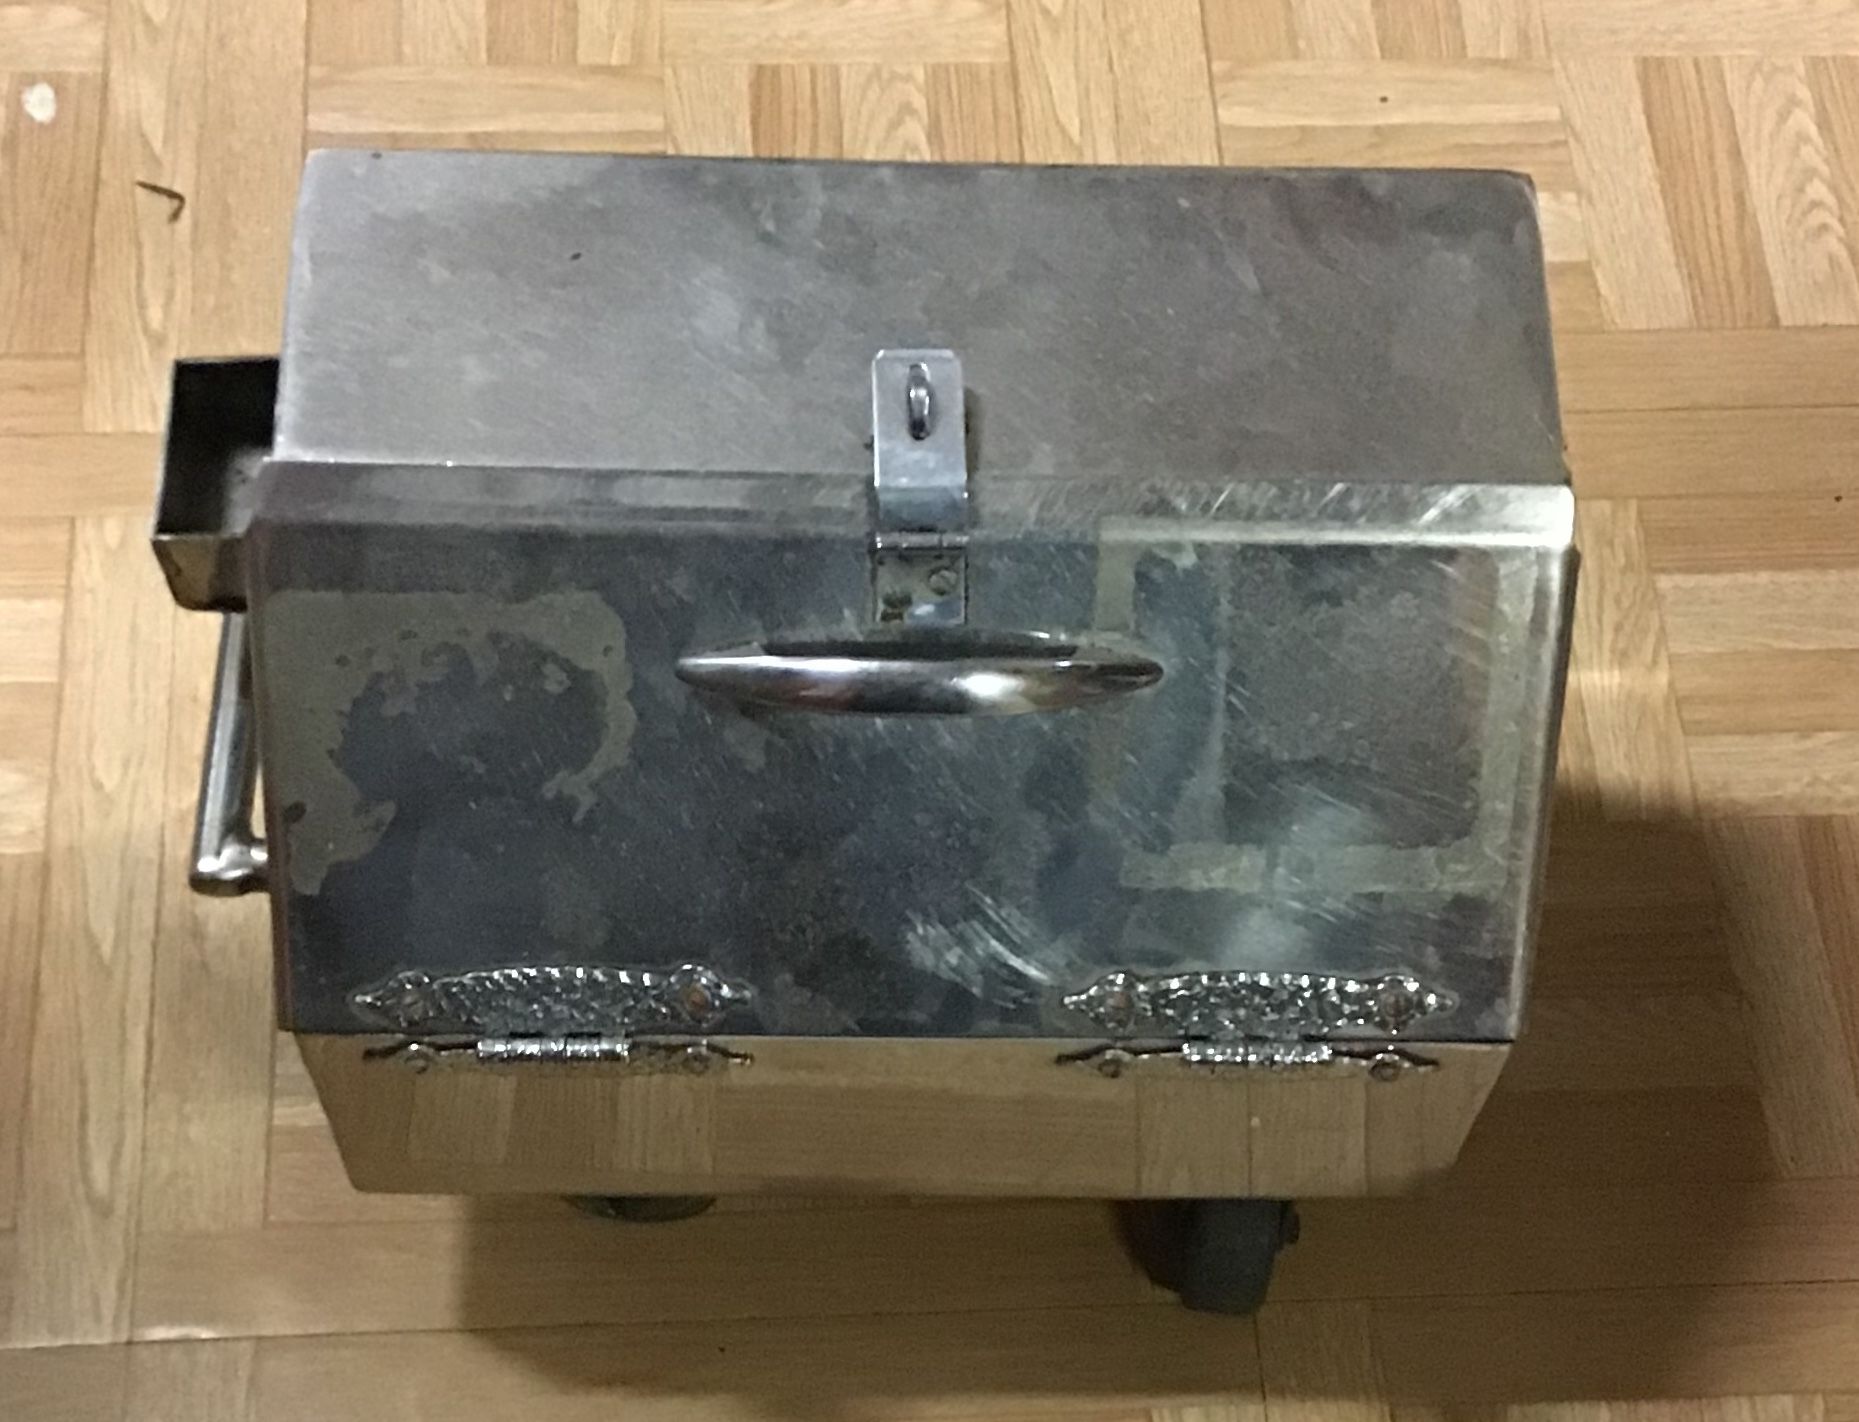 Extraordinary Antique (45 year old ) Tool Box